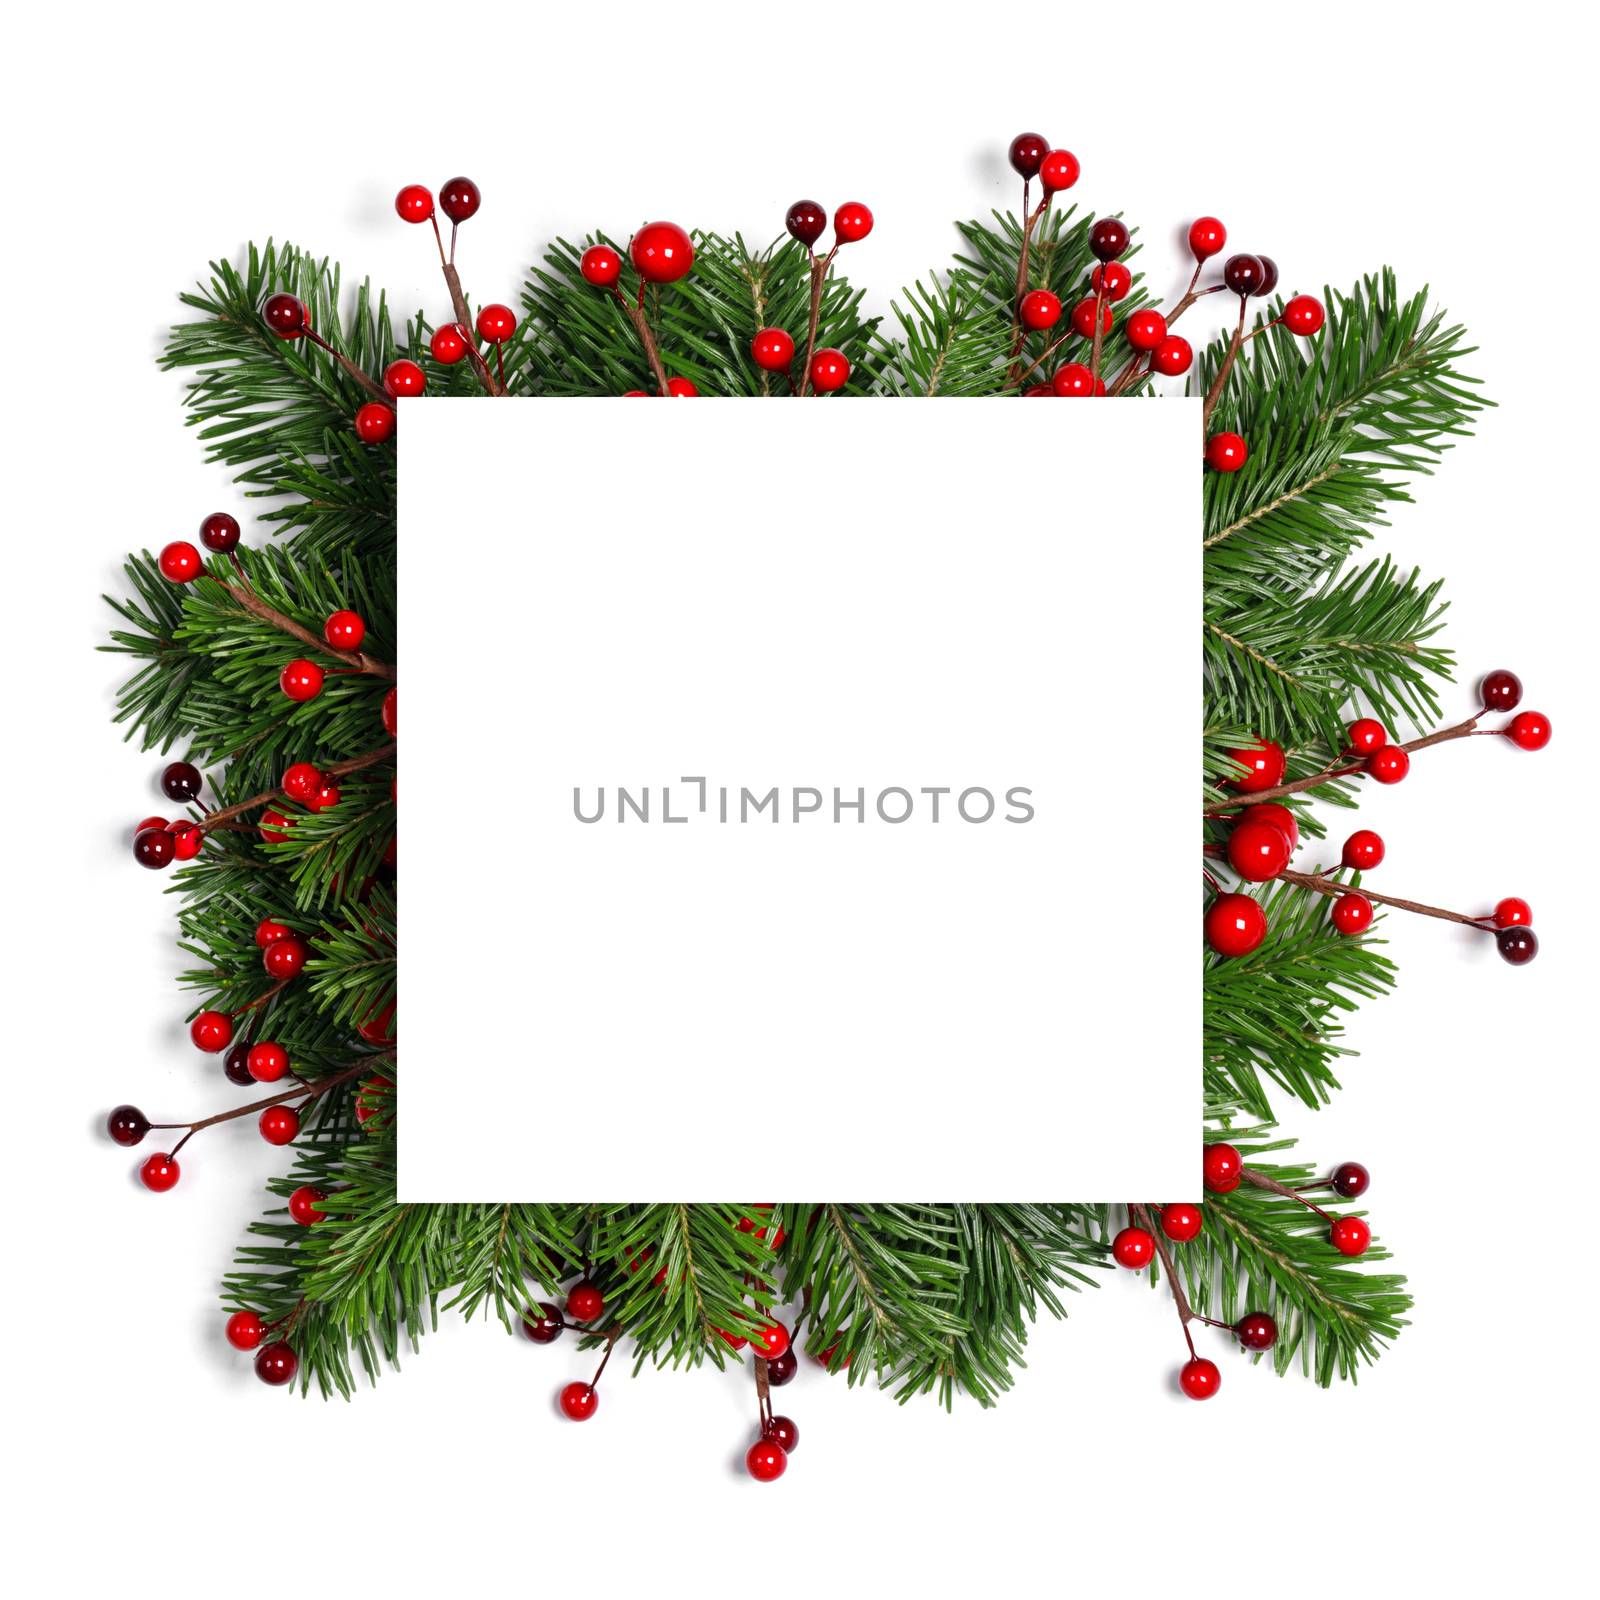 Christmas border arranged with fresh fir branches and red berries isolated on white background , copy space for text